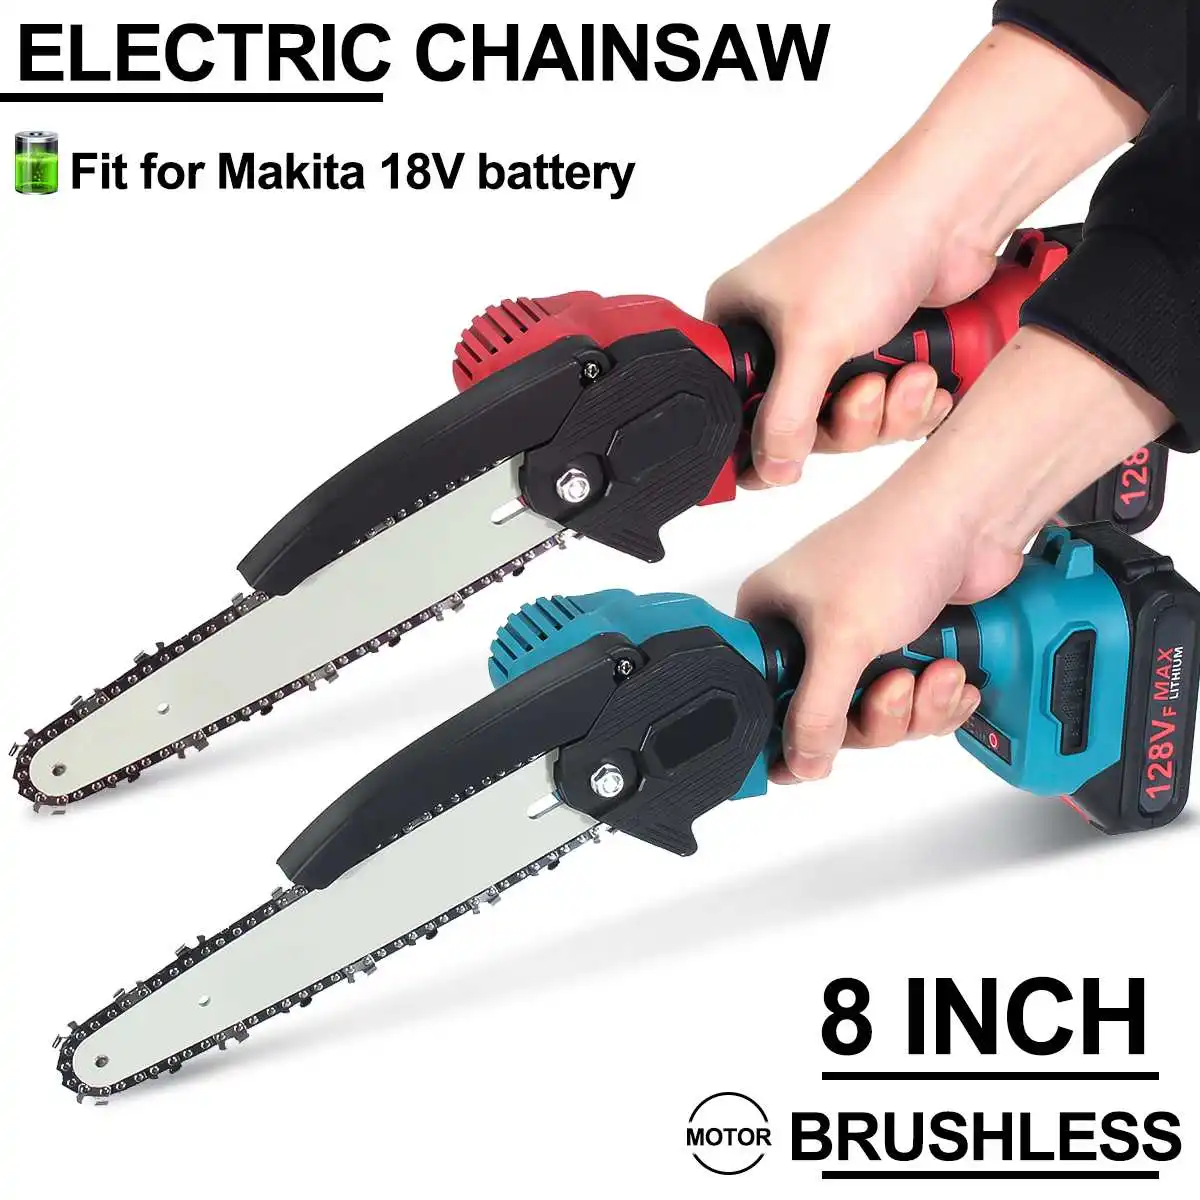 

8 Inch Brushless Mini Electric Chain Saw Woodworking Pruning ChainSaw One-handed Garden Logging Power Tool With 2Pcs Battery